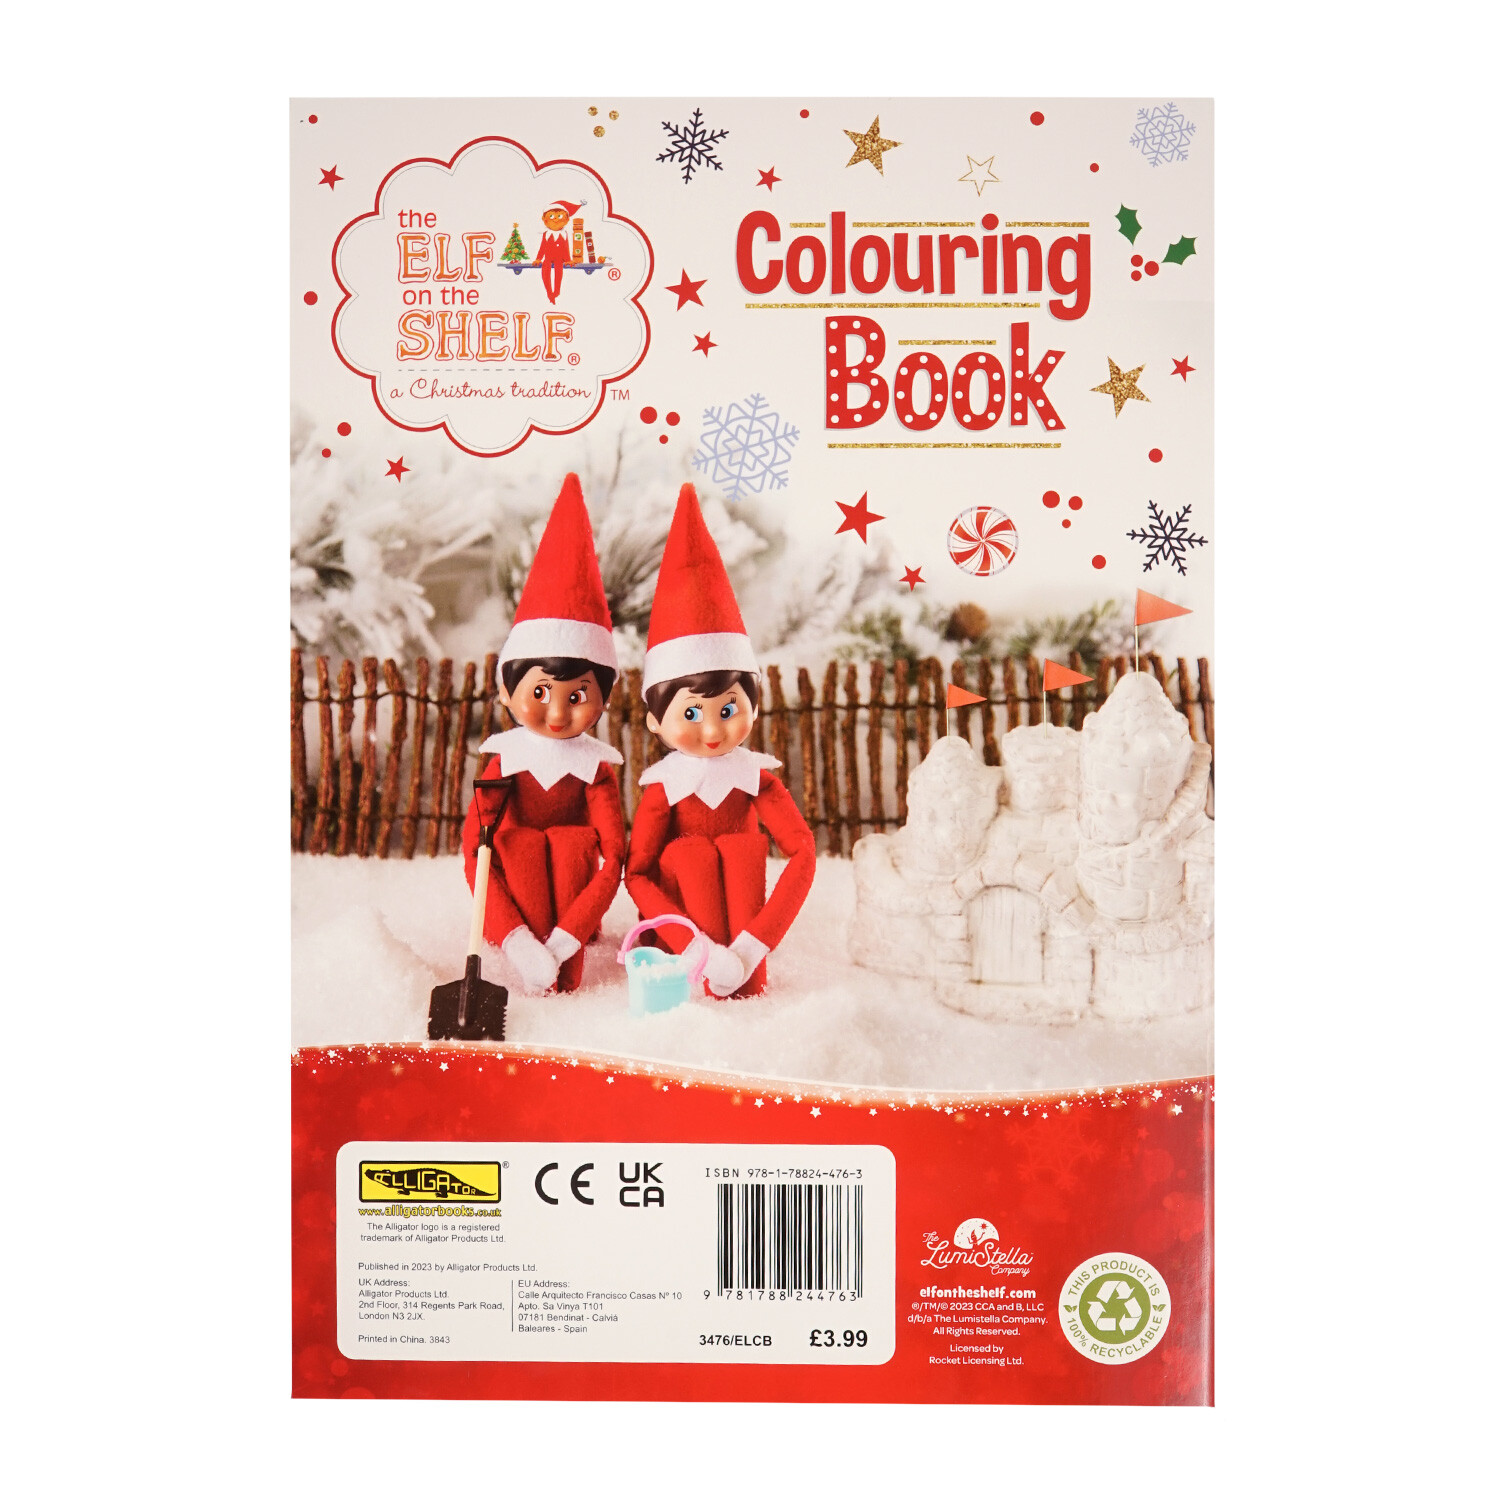 The Elf On The Shelf Kids Colouring Book Image 2